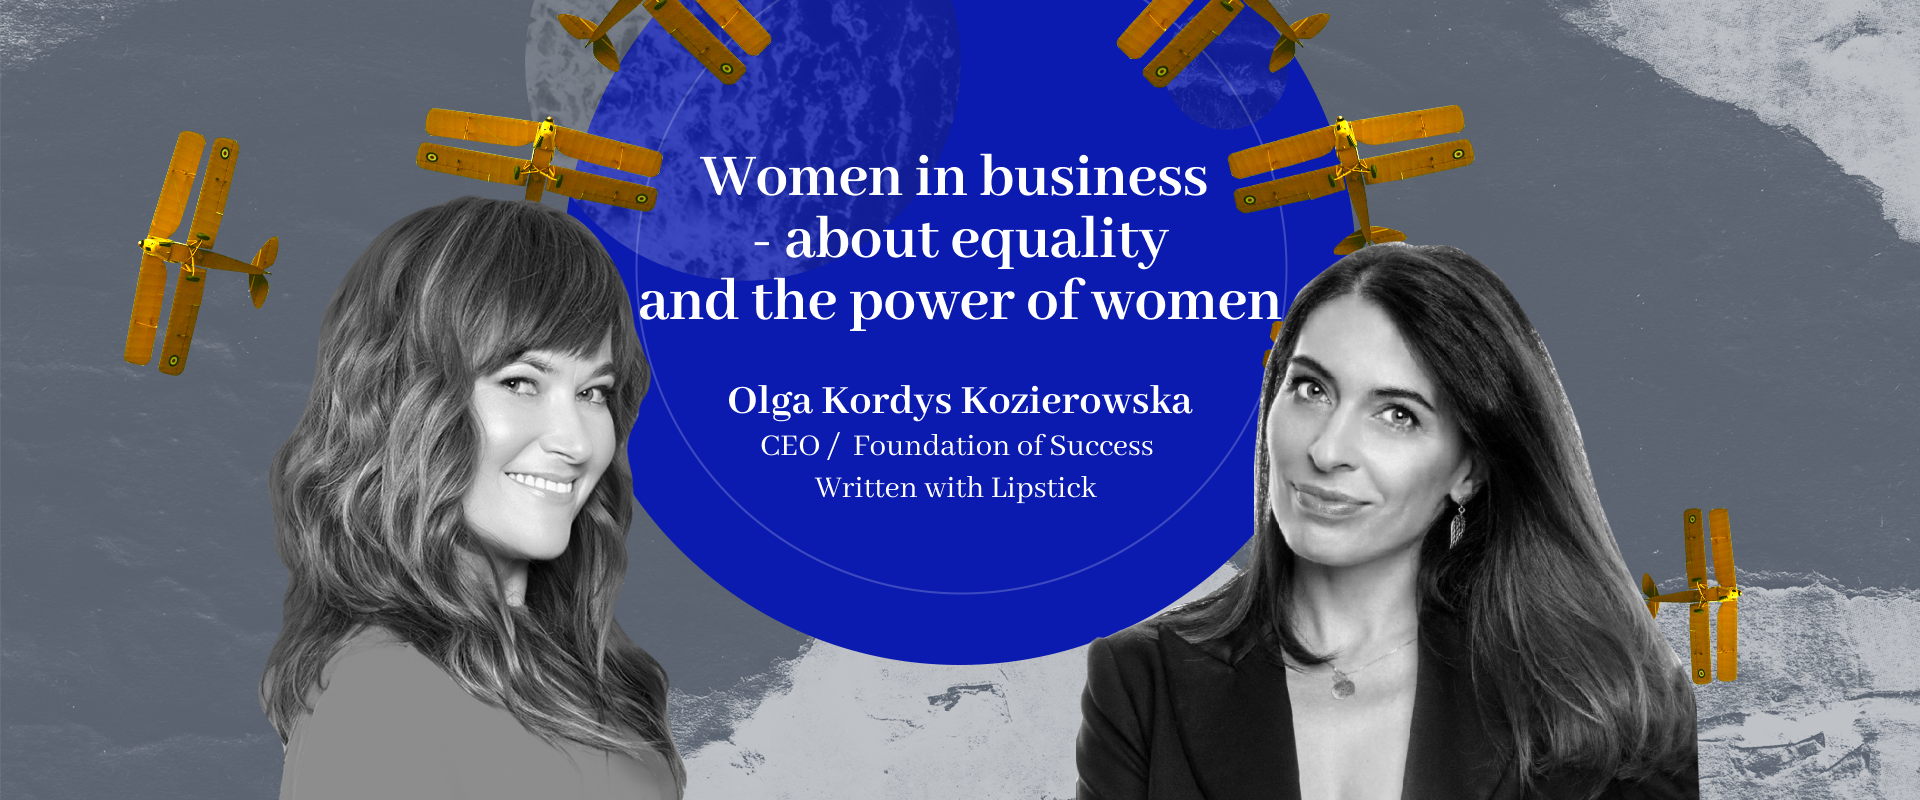 Women in business – about equality and the power of women